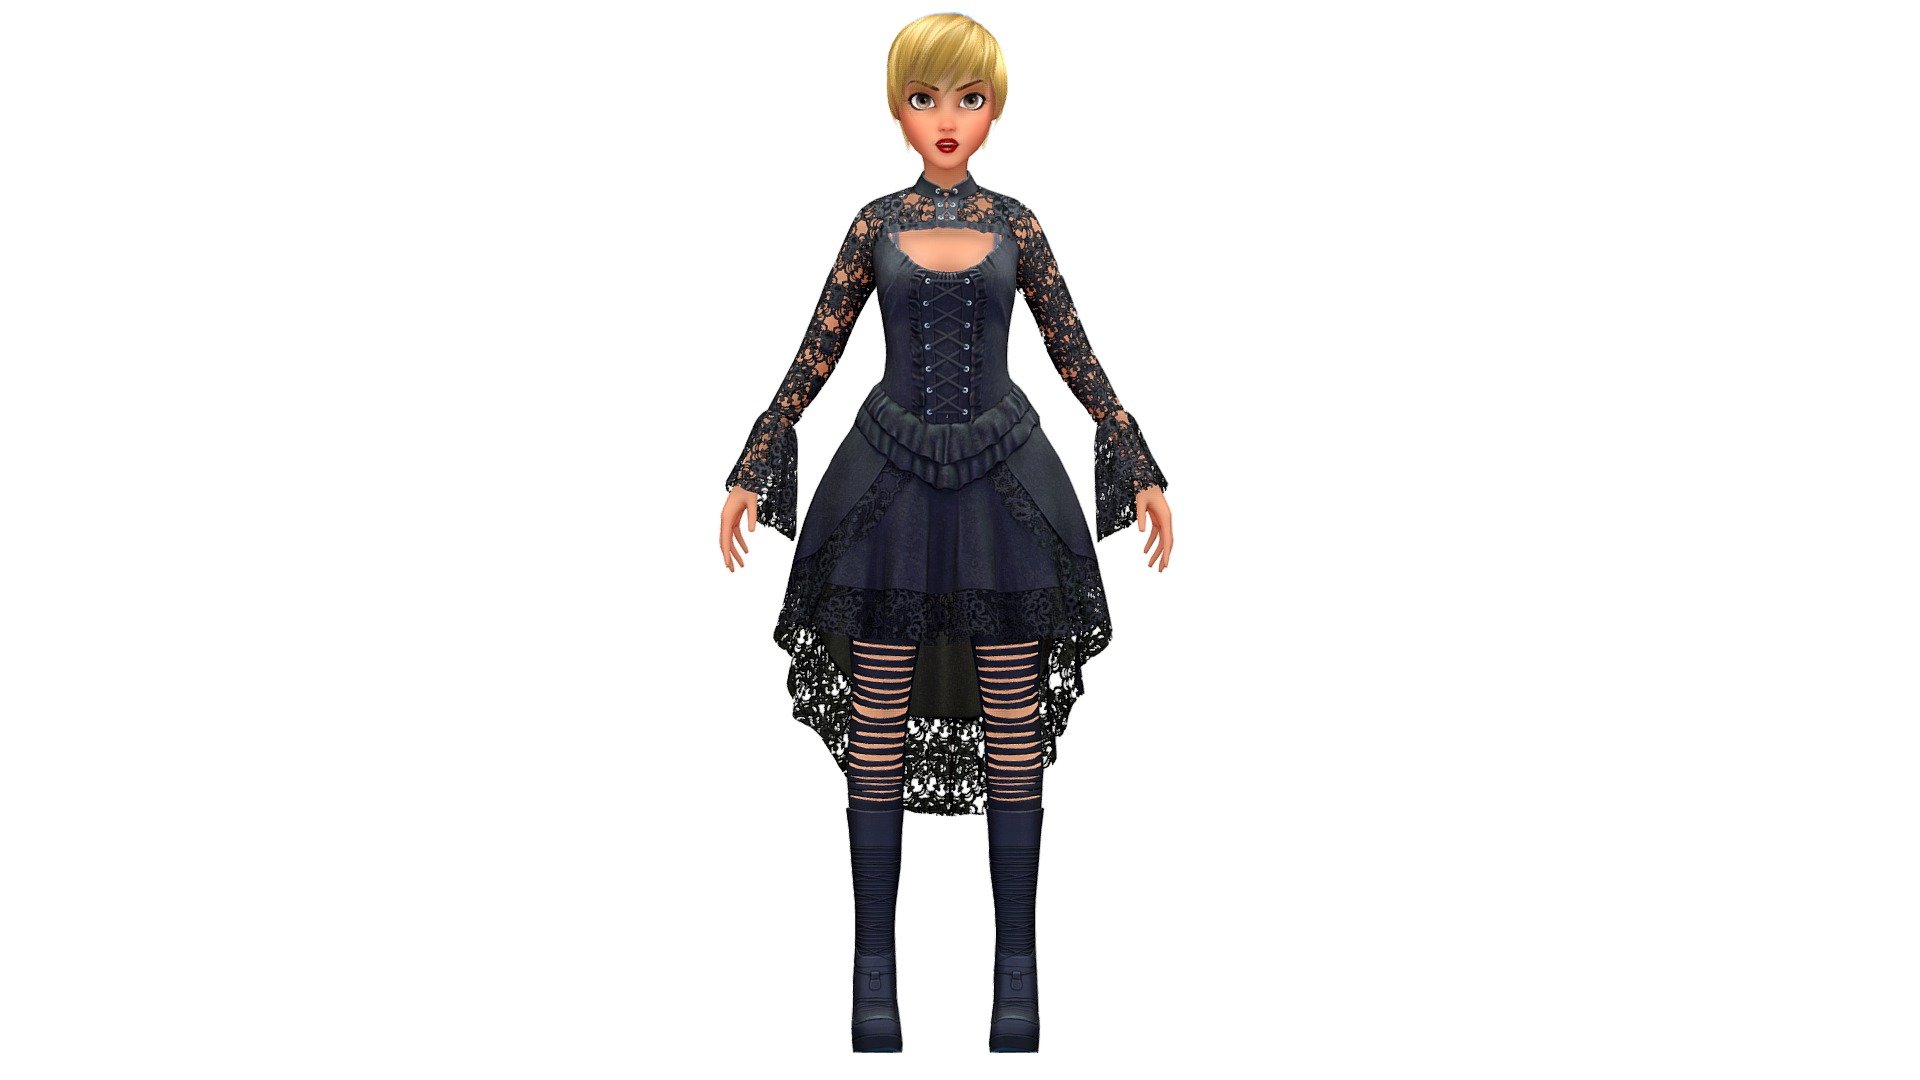 you can combine and match other combinations using the collection:

hair collection - https://skfb.ly/ovqTn

clotch collection - https://skfb.ly/ovqT7

lowpoly avatar collection - https://skfb.ly/ovqTu - Cartoon Low Poly Gothic Style Girl Avatar 3 - Buy Royalty Free 3D model by Oleg Shuldiakov (@olegshuldiakov) 3d model